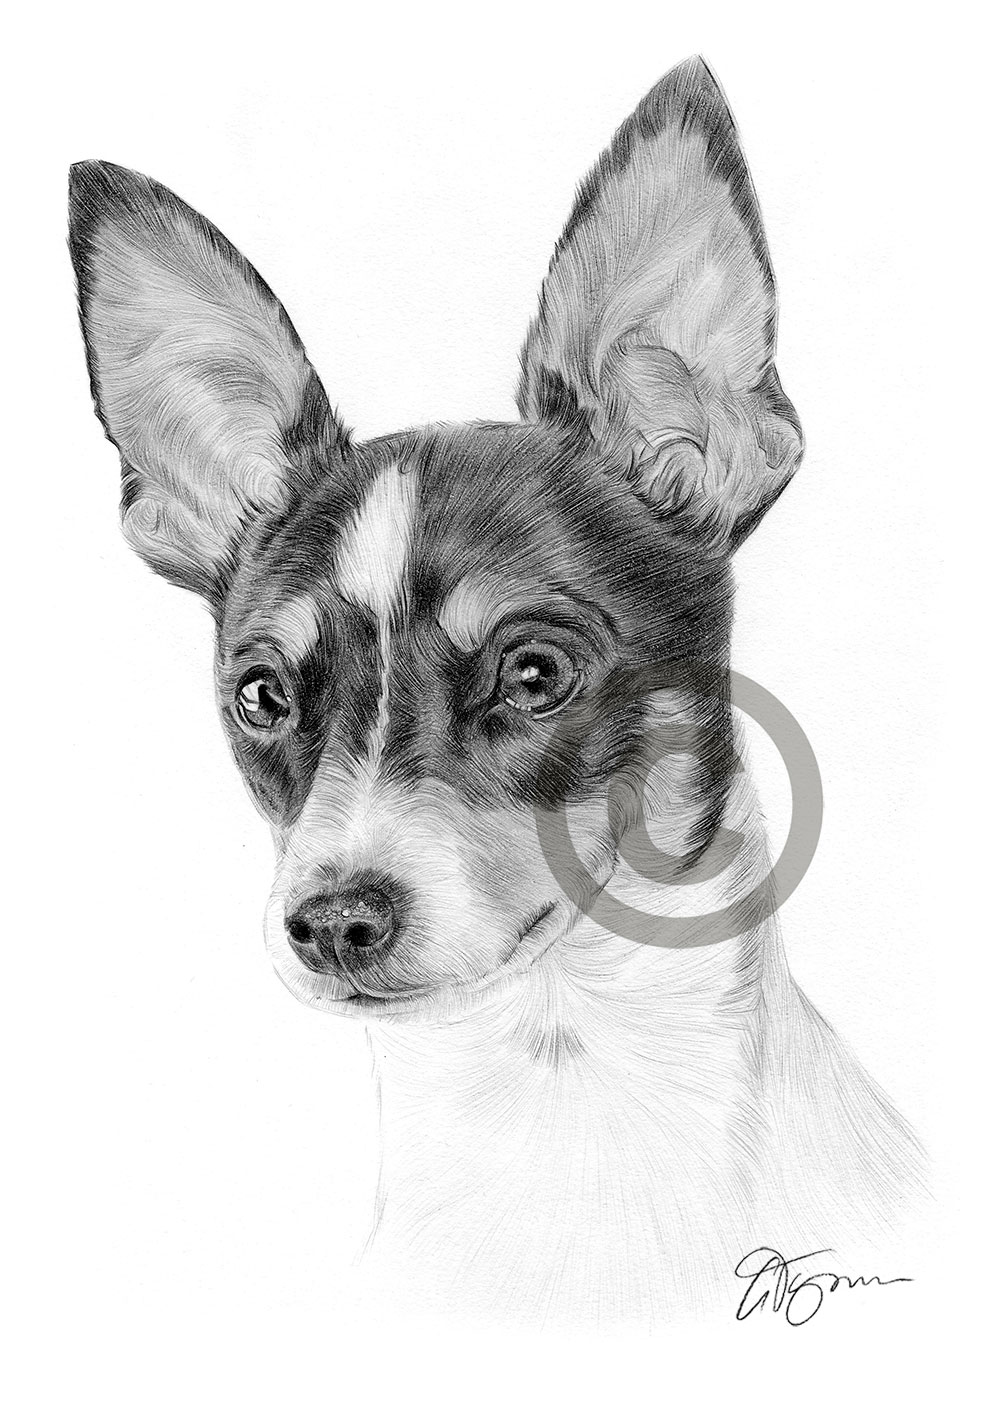 Pencil drawing of a young toy fox terrier by artist Gary Tymon